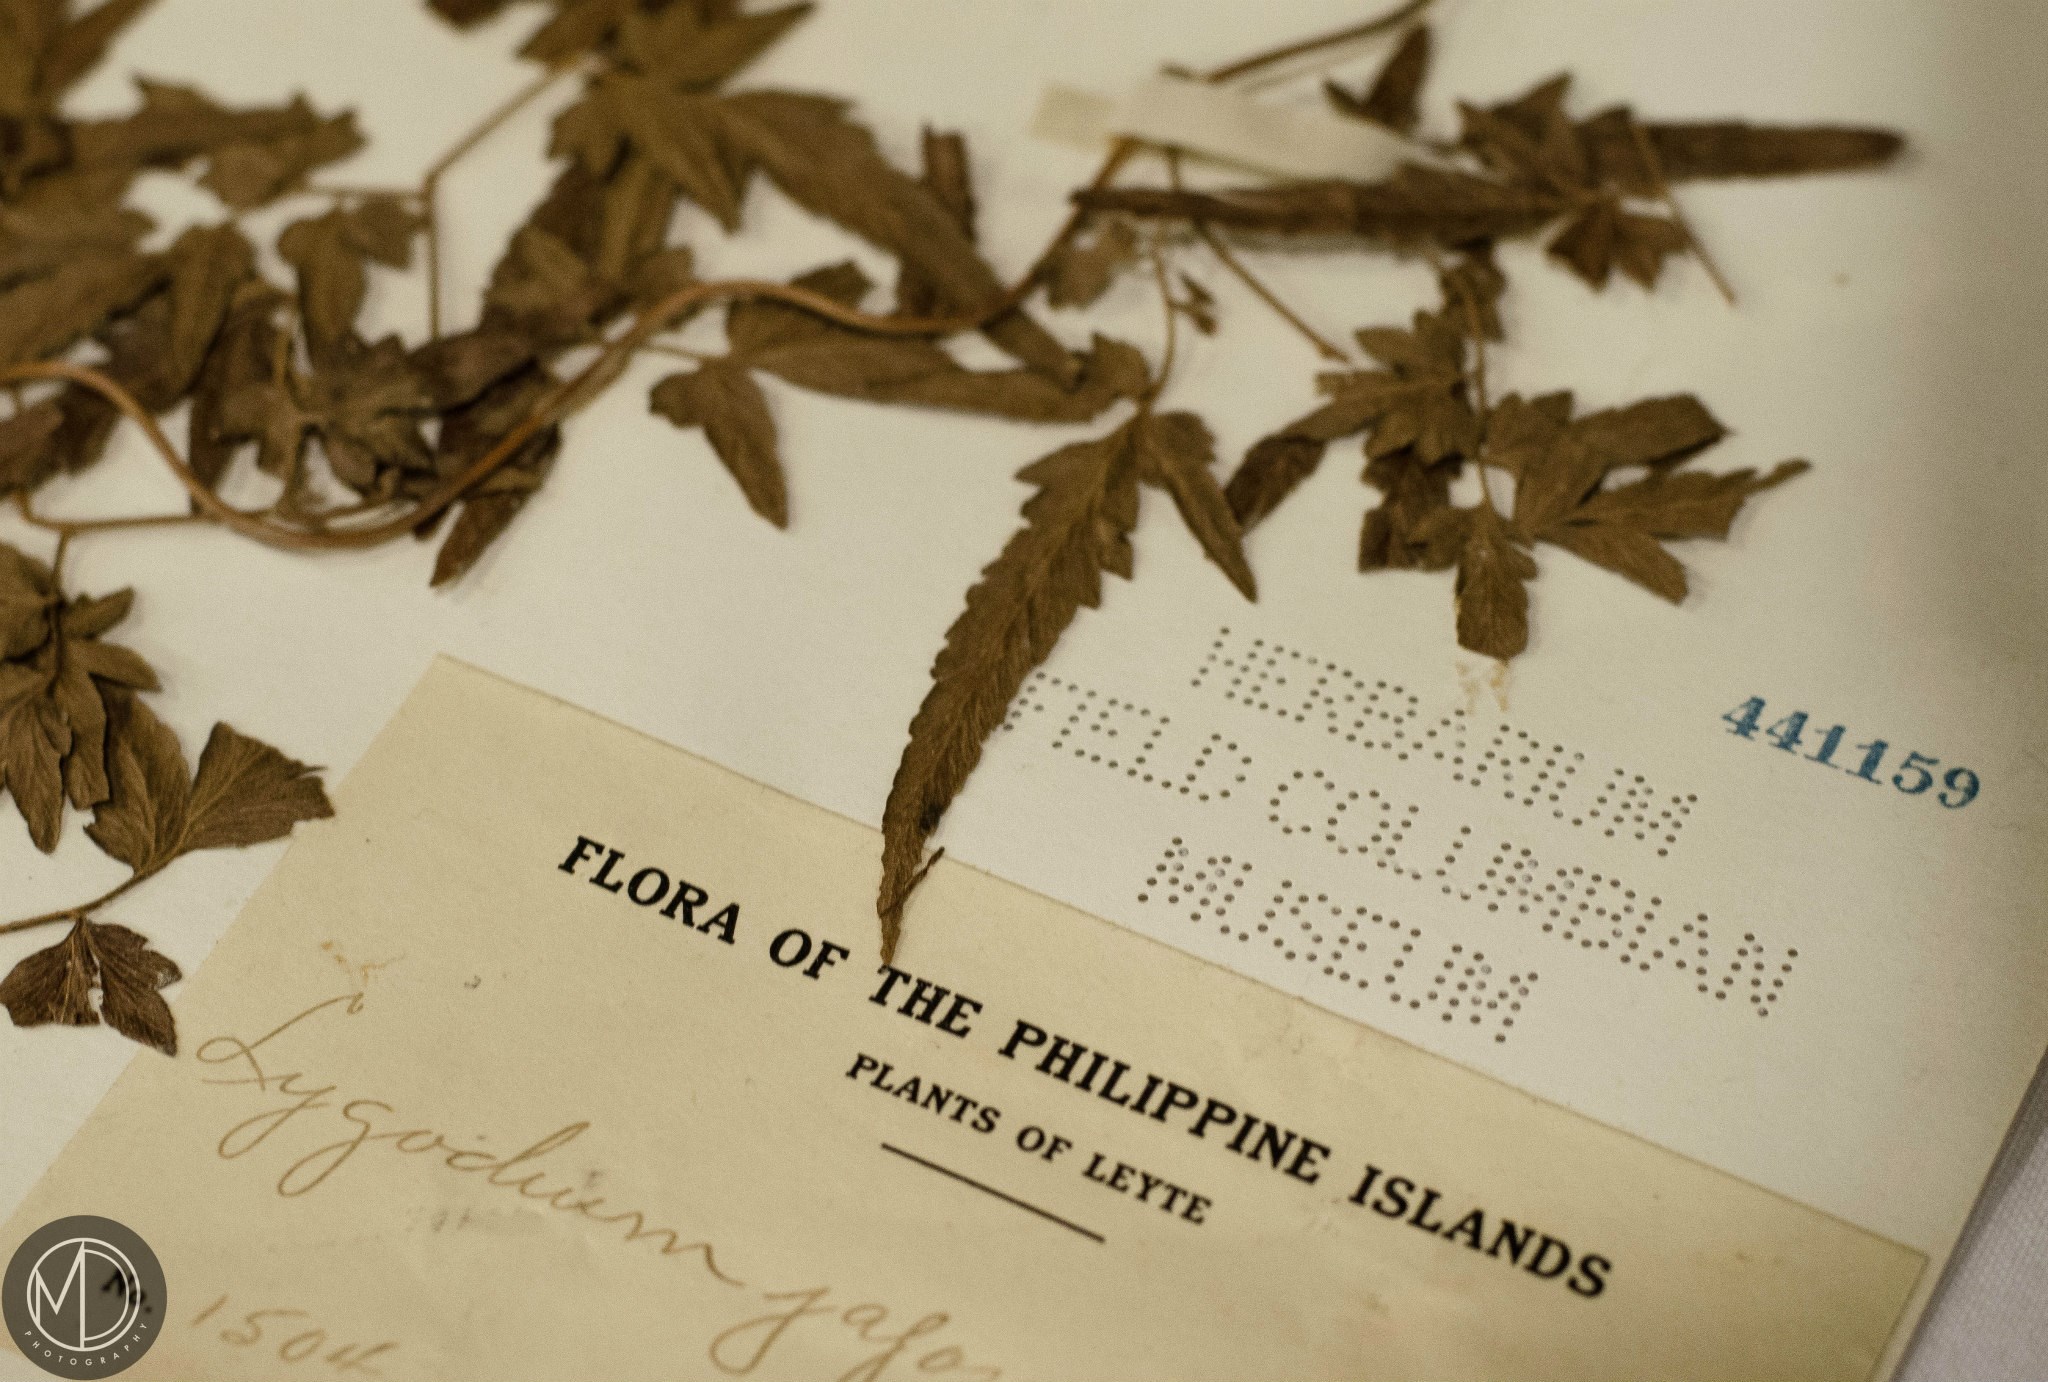 Close up of botanical specimens borrowed from the Botany collection for display. (c) Field Museum of Natural History - CC BY-NC 4.0